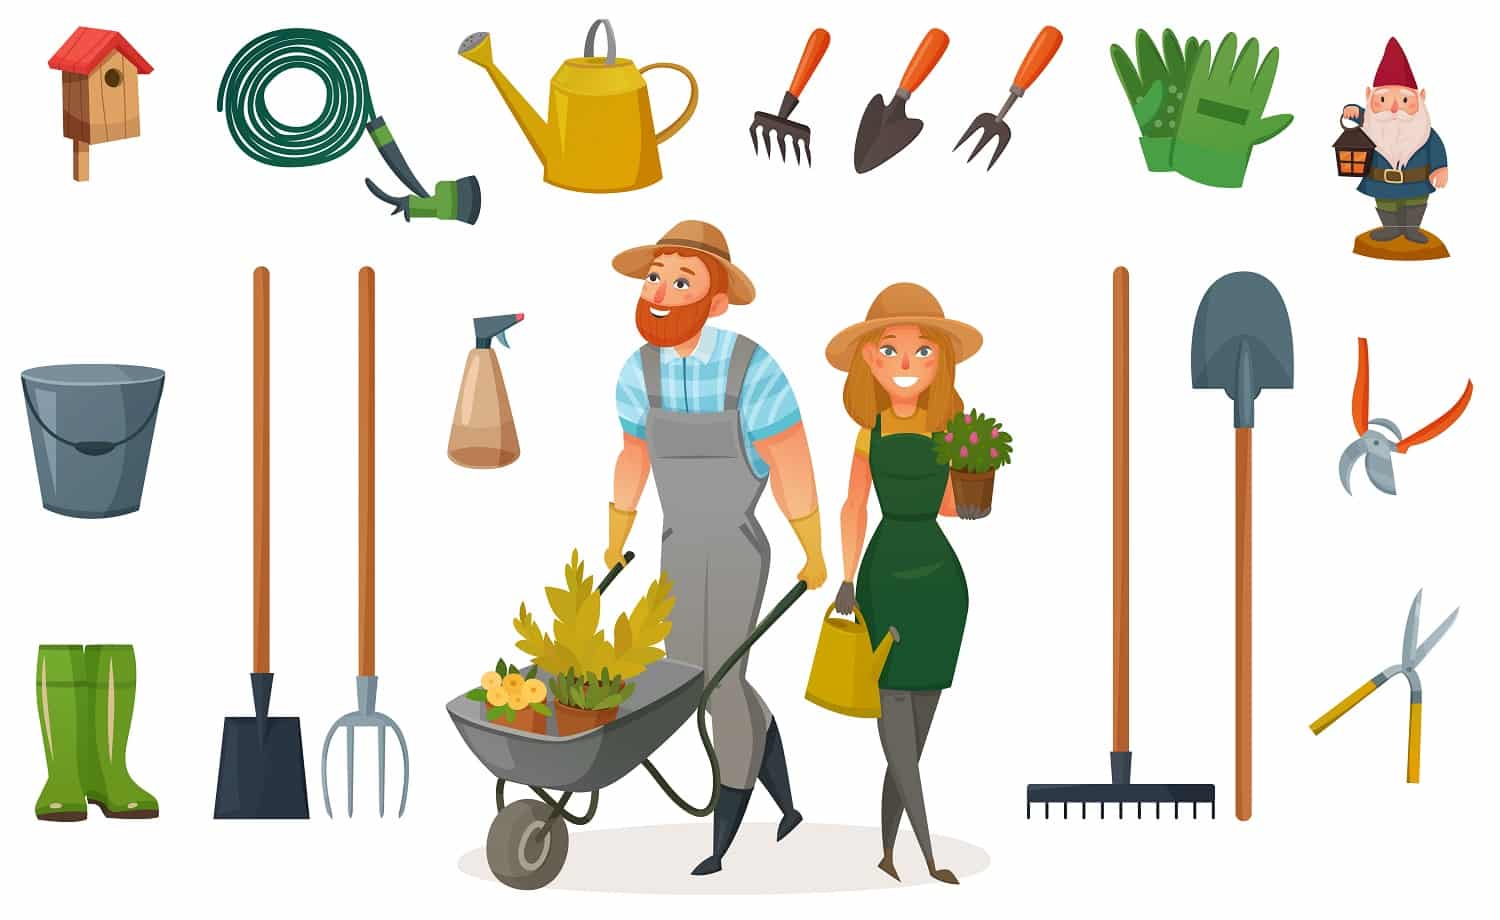 Gardening cartoon icon set with attributes and elements for work in garden vector illustration